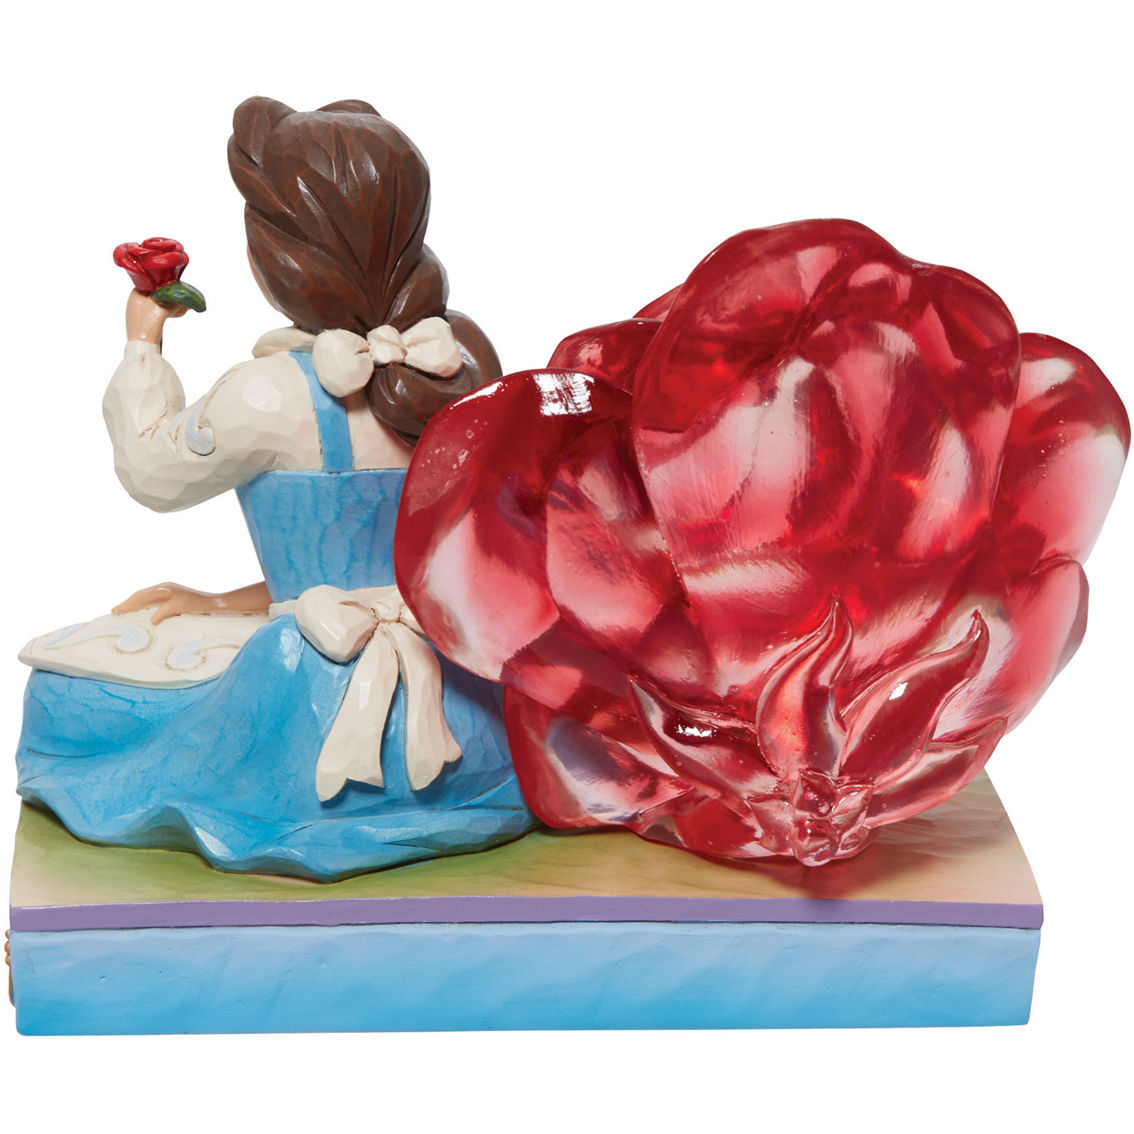 Jim Shore Disney Traditions Belle Clear Resin Rose - Image 2 of 3